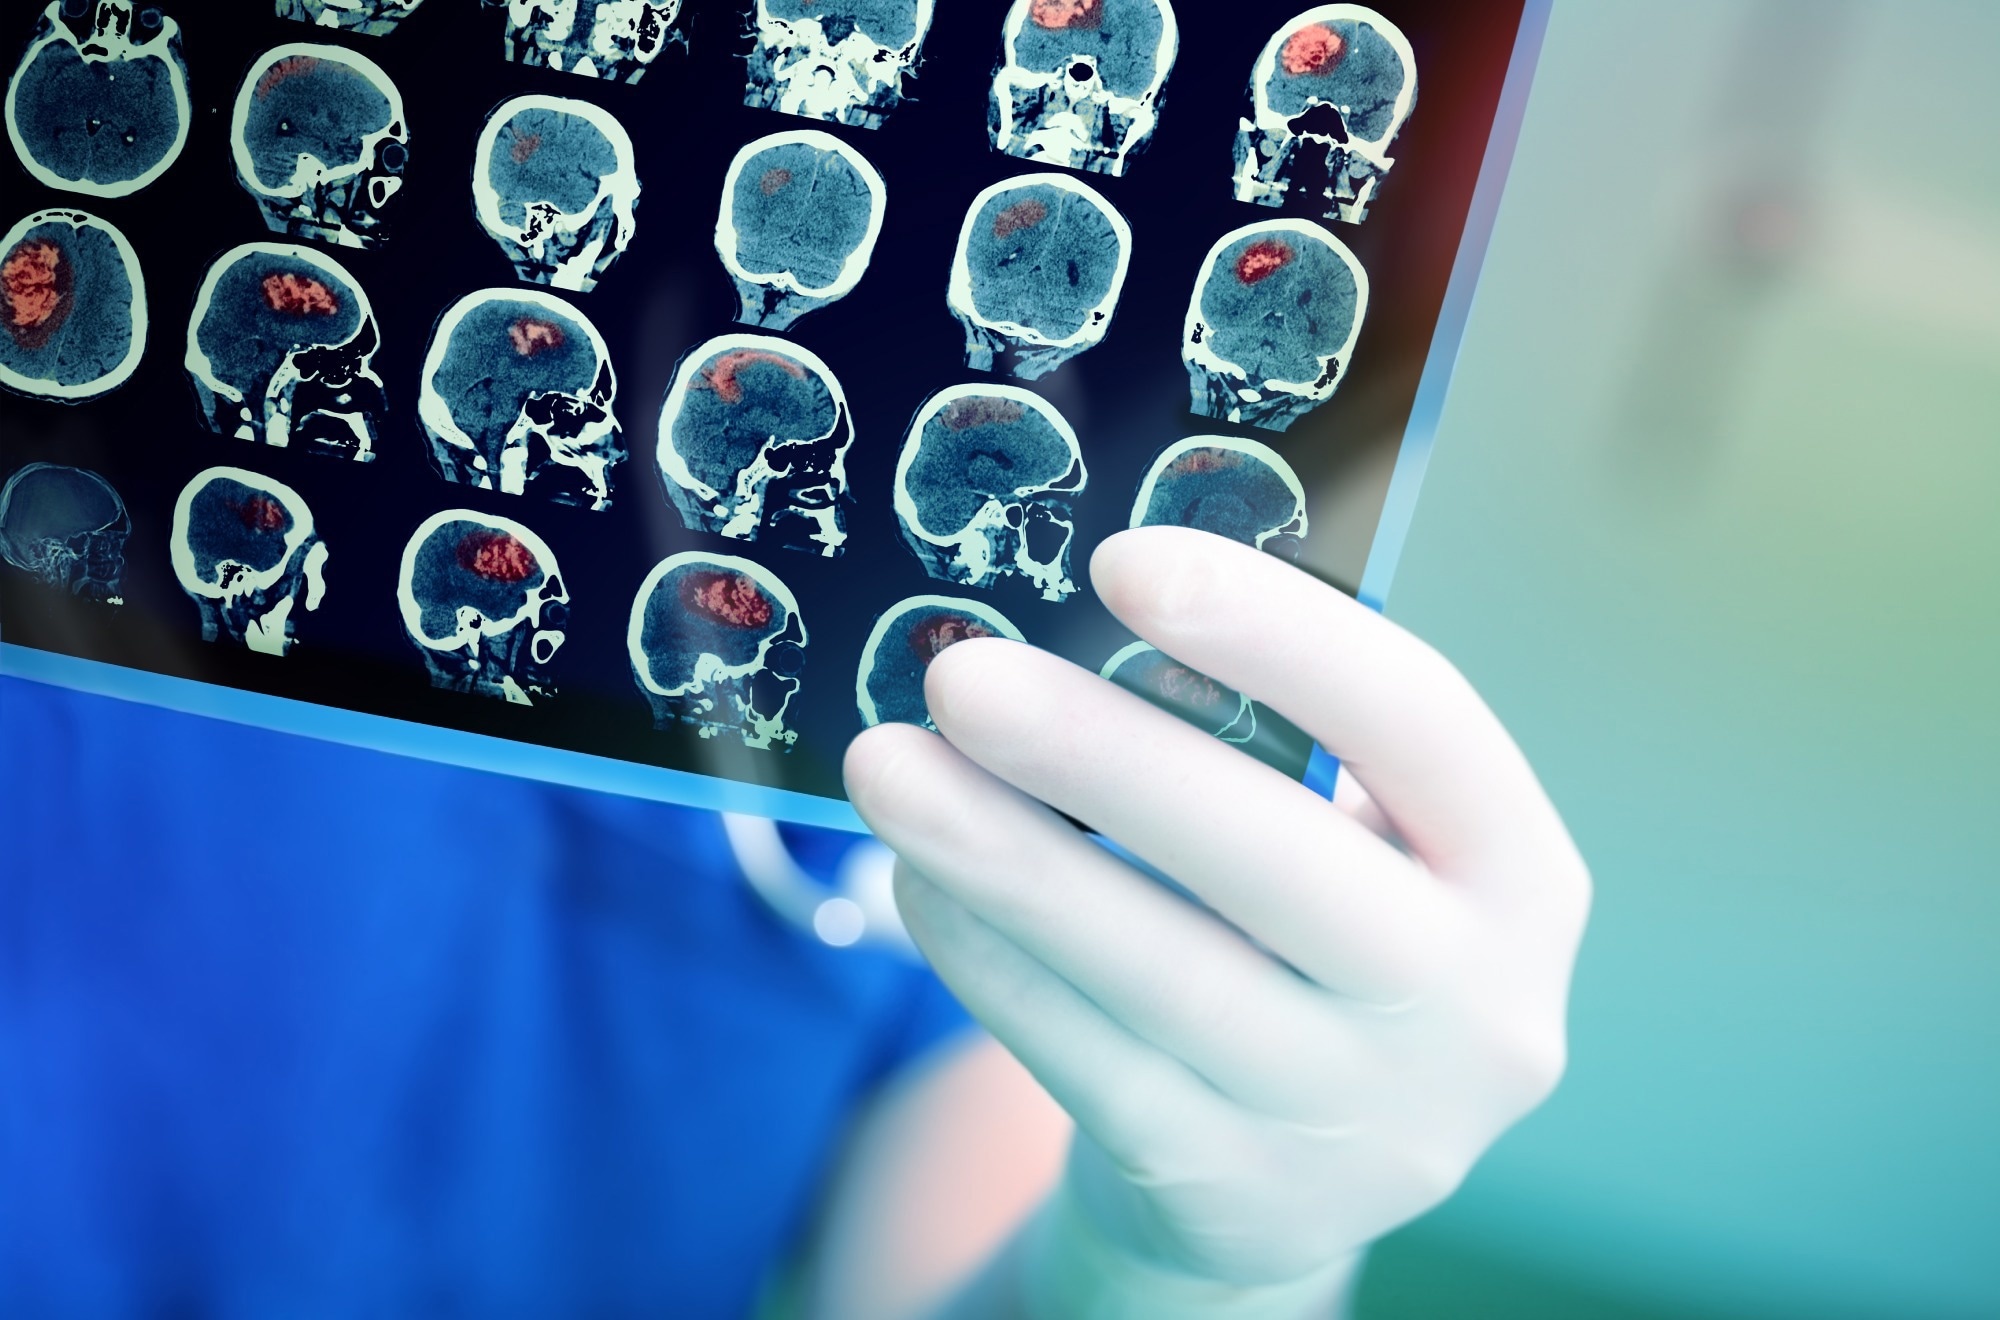 Study: Brain injury in COVID-19 is associated with dysregulated innate and adaptive immune responses. Image Credit: sfam_photo / Shutterstock